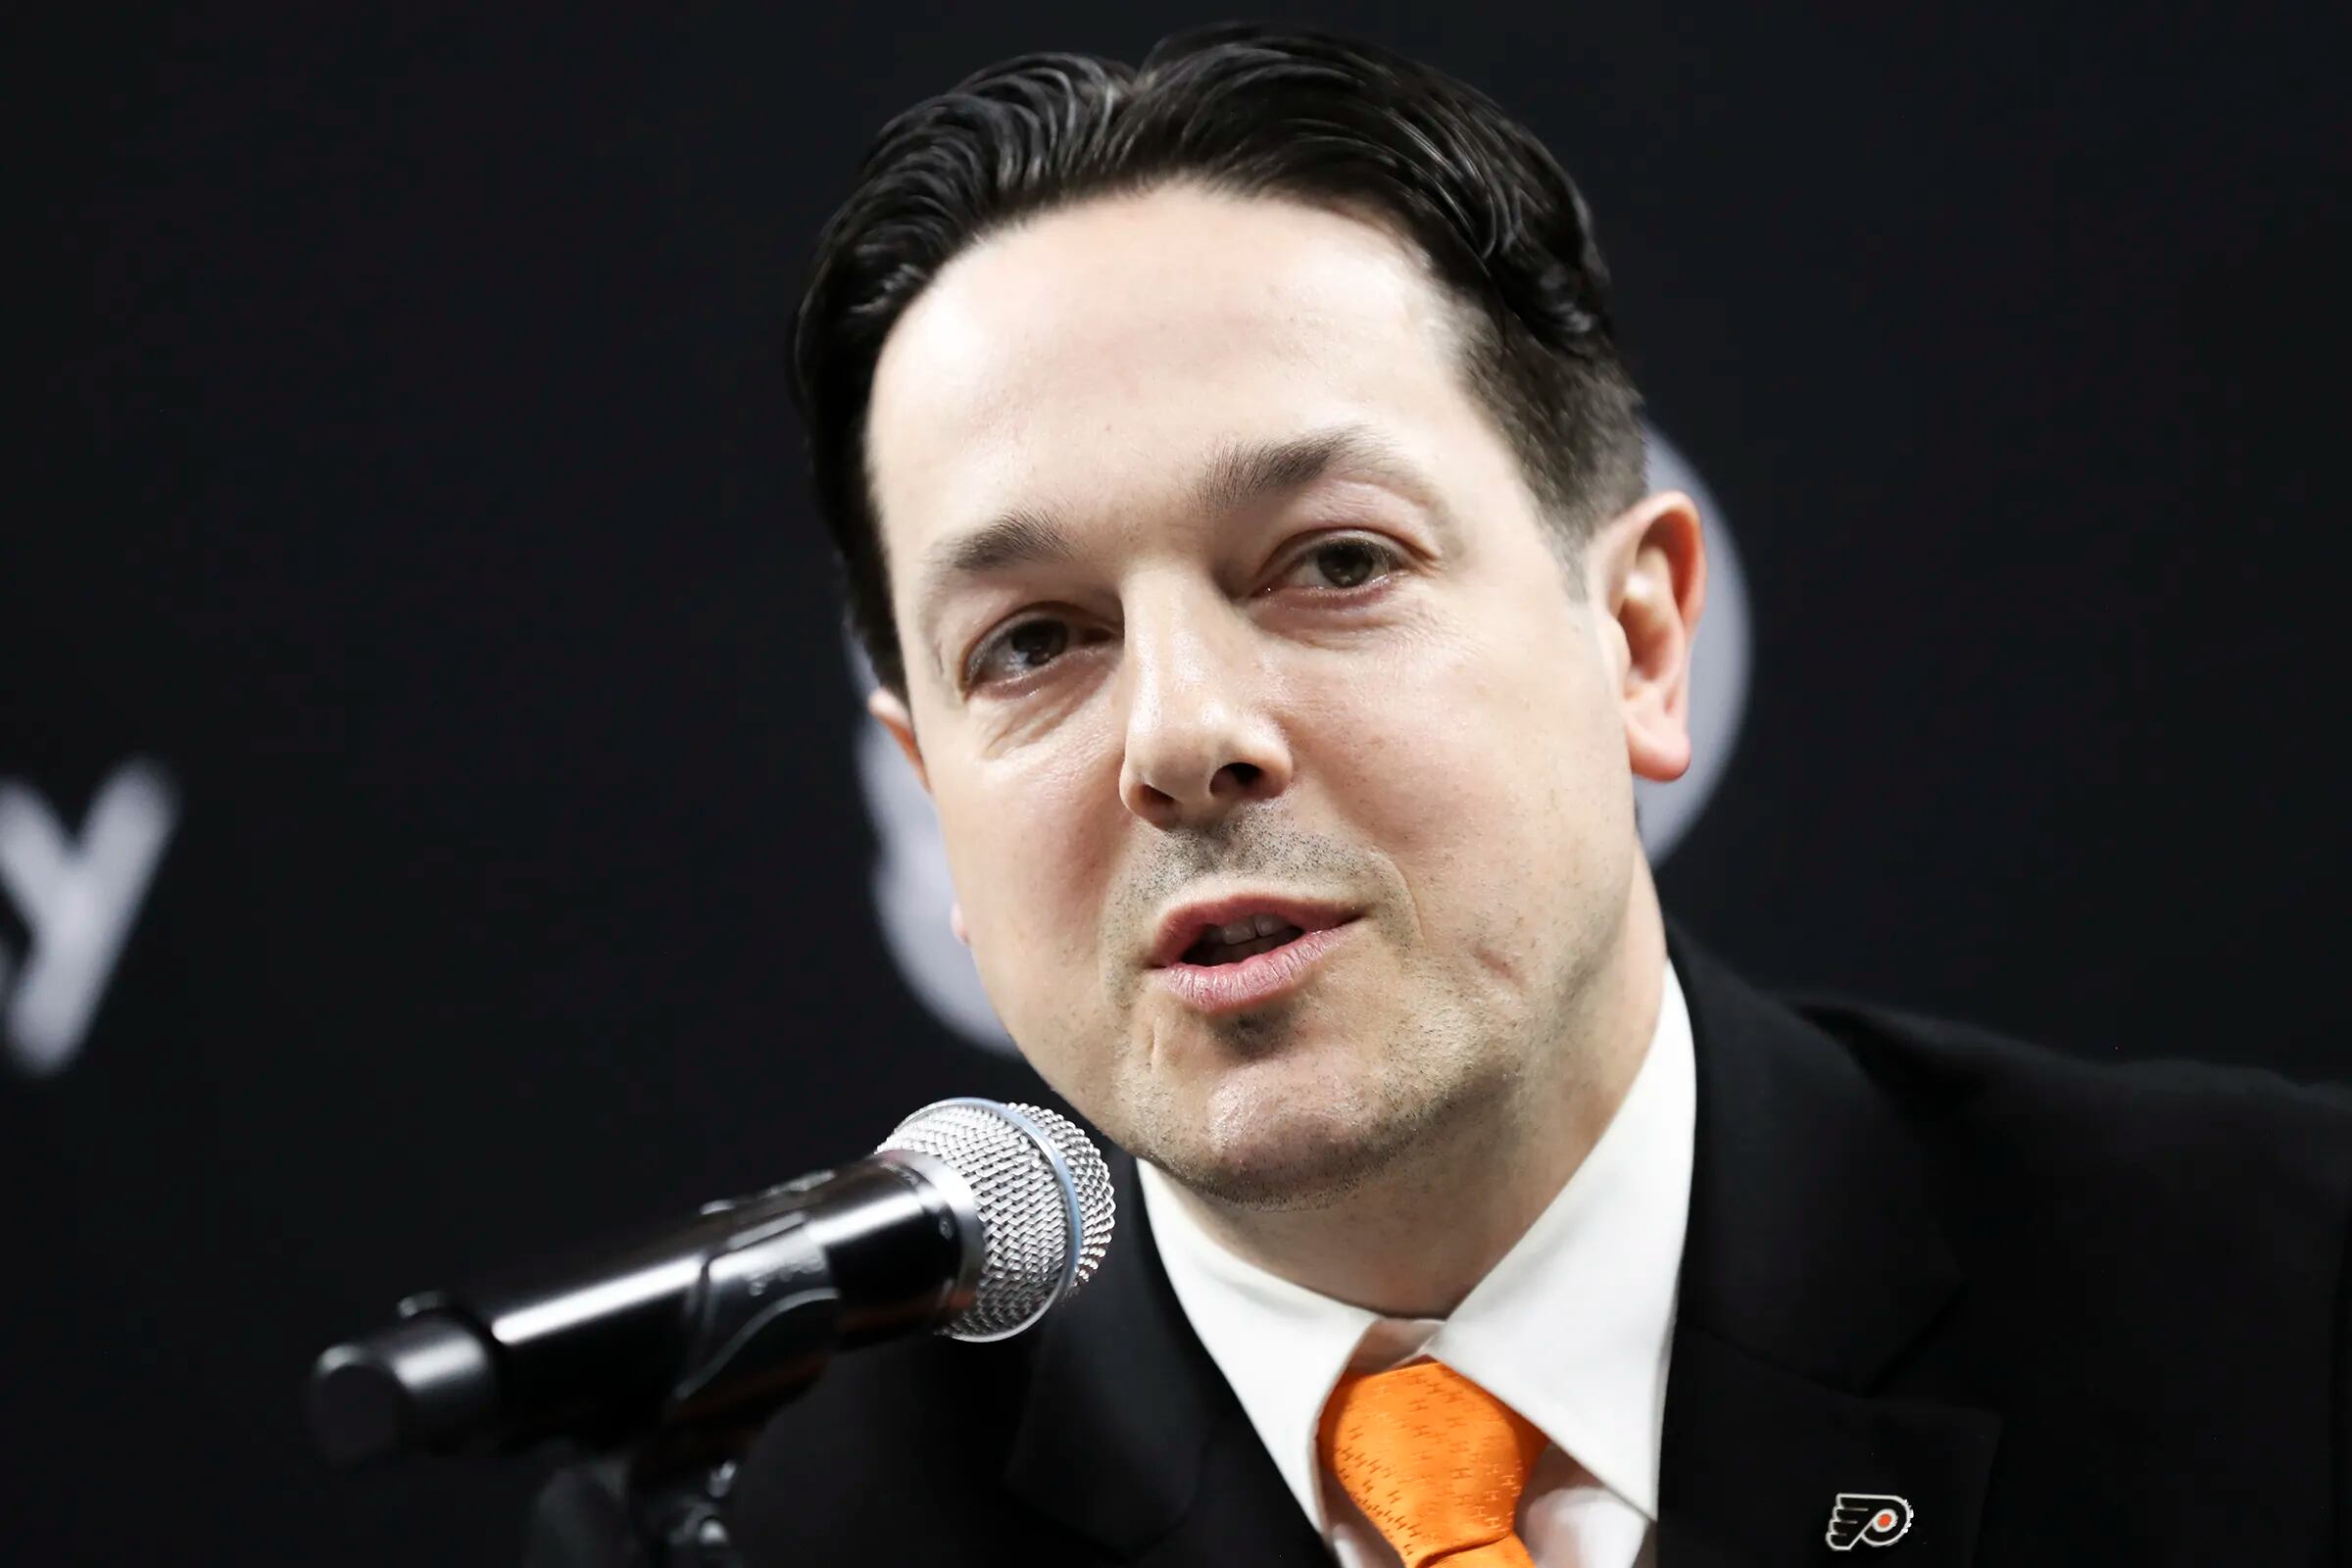 Flyers offseason checklist includes prioritizing the draft over free agency